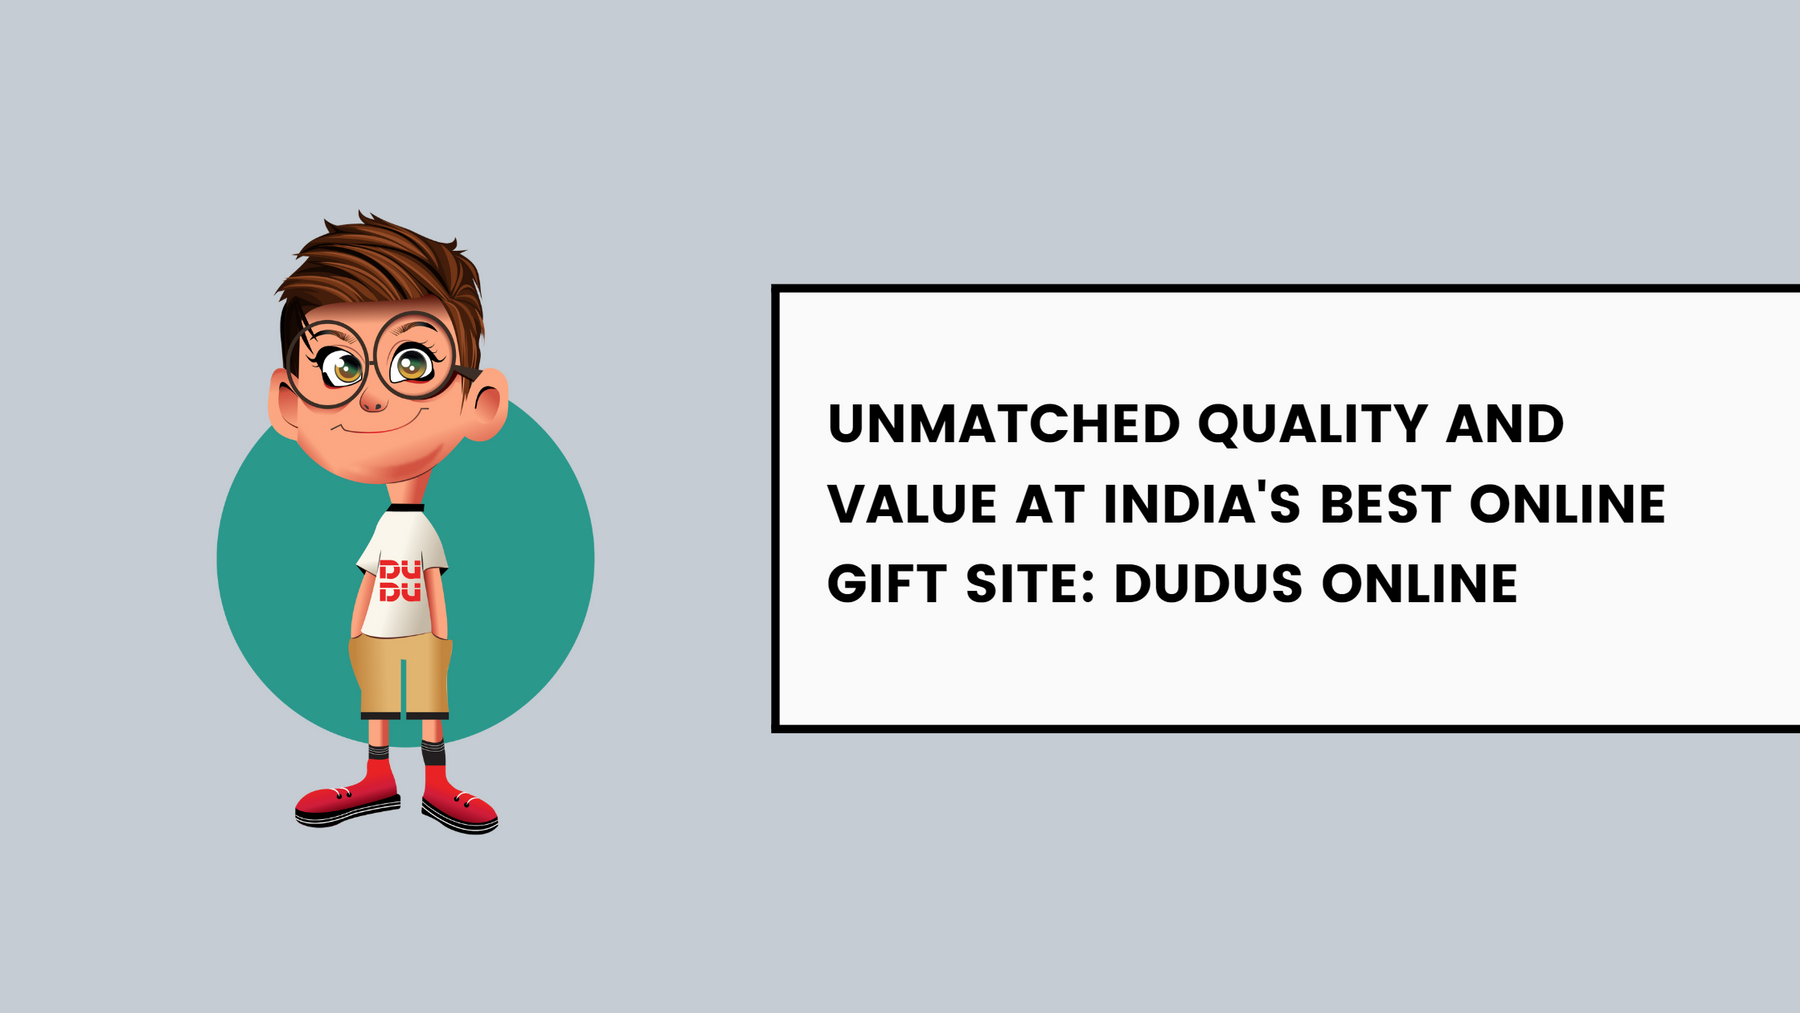 Unmatched Quality And Value At India's Best Online Gift Site: Dudus Online